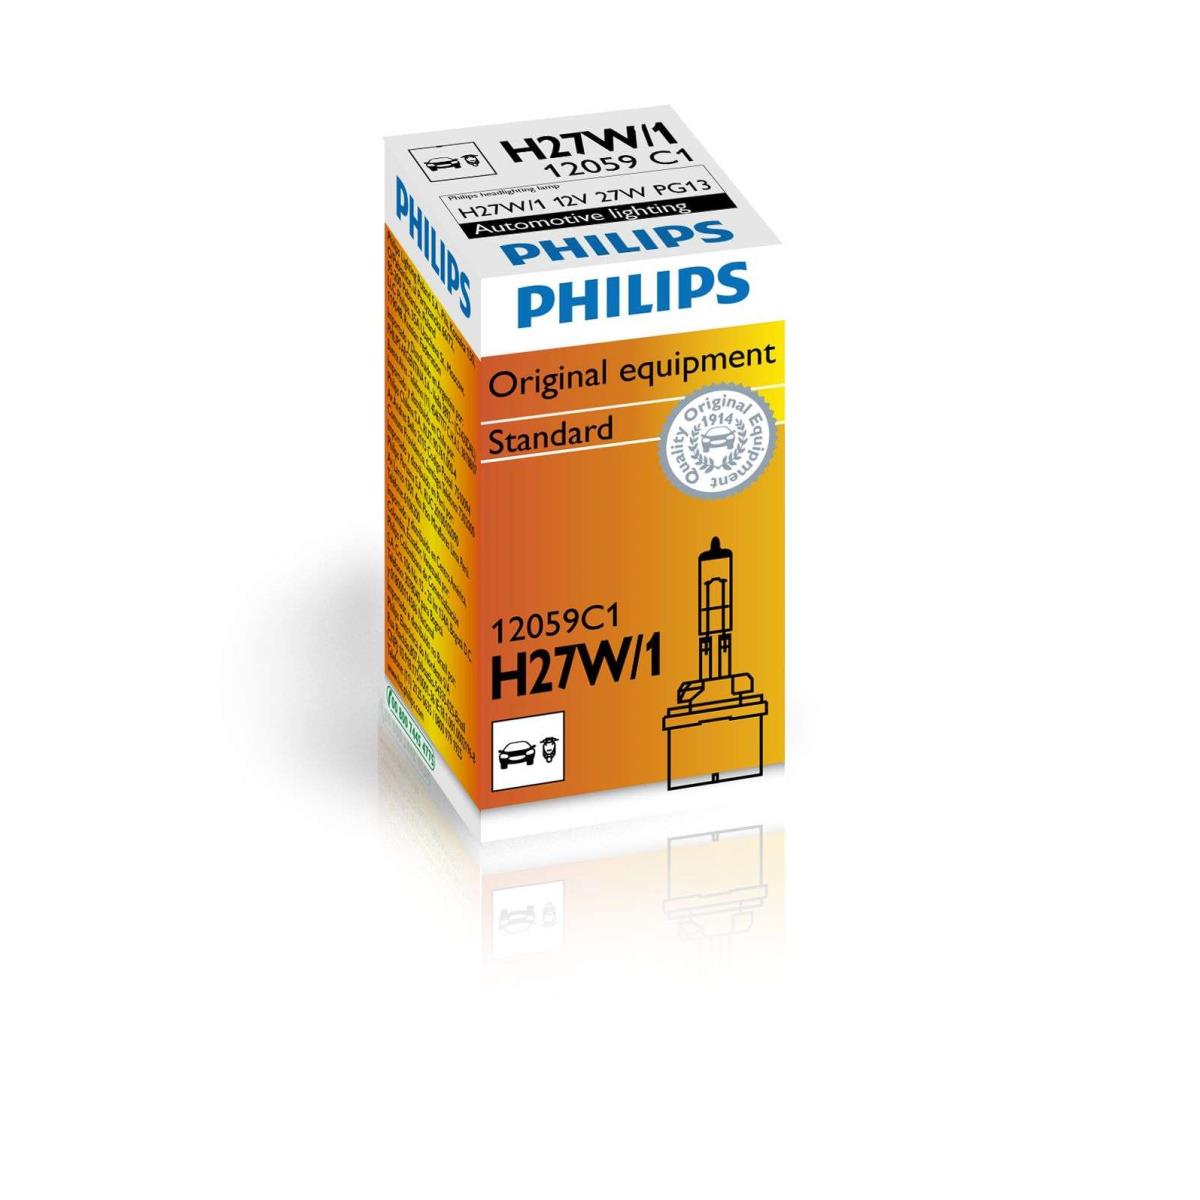 PHILIPS 12059C1 Glühlampe Beleuchtung